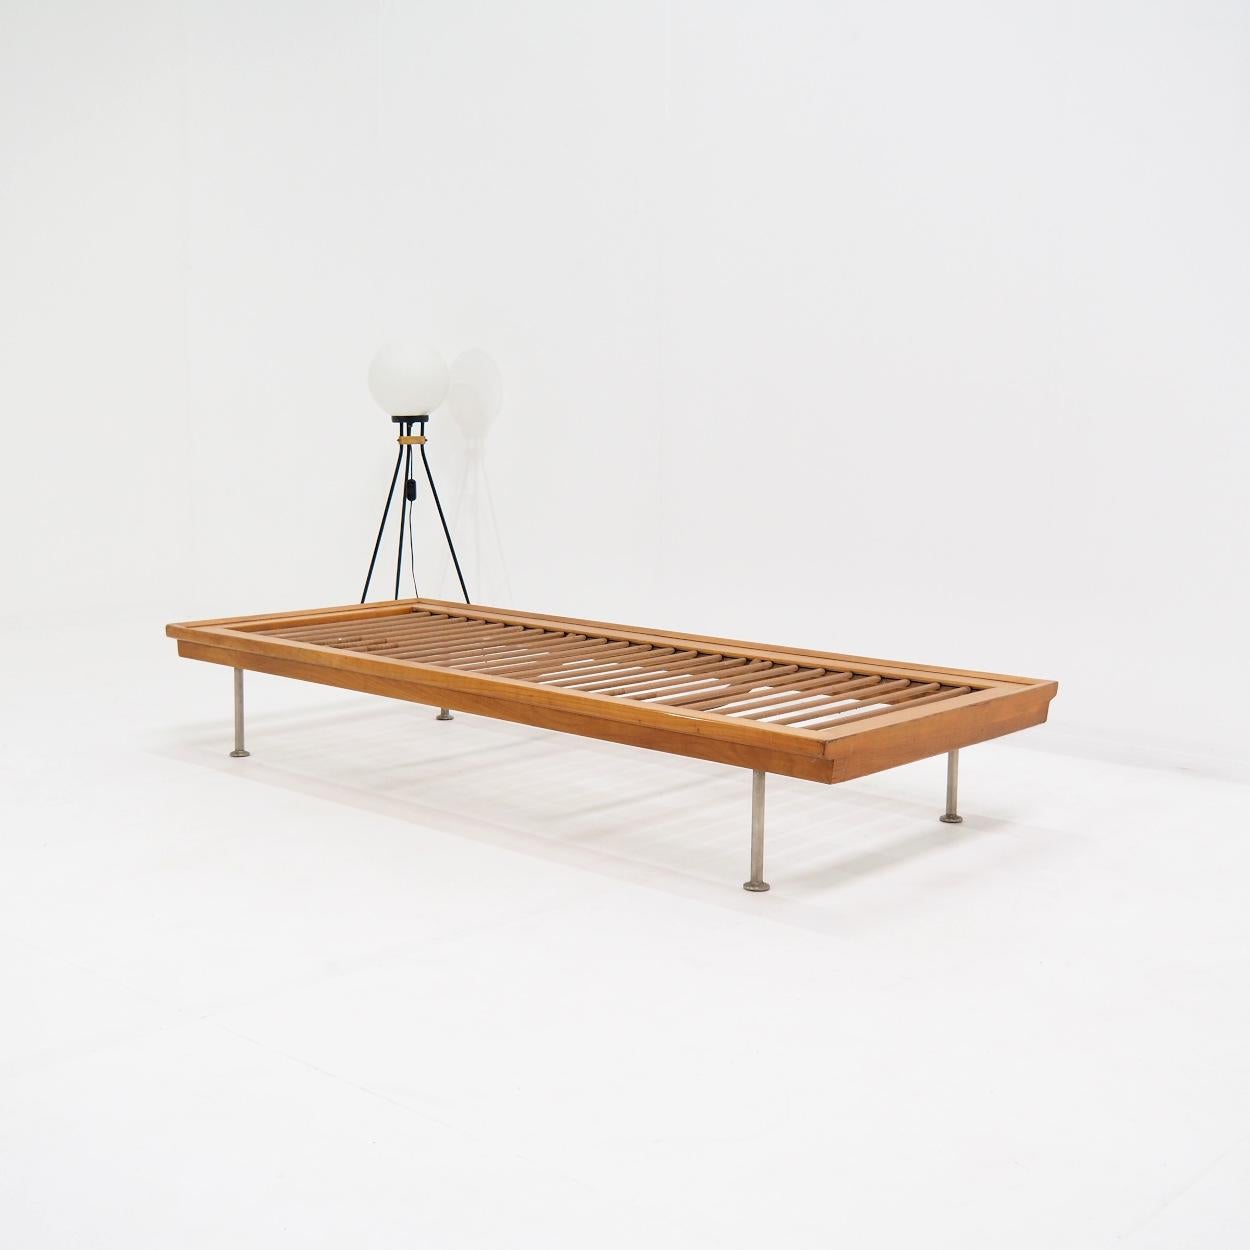 Beautiful vintage Mid-century daybed with clear lines. It was probably manufactured in Germany and dates from the 1950s.

The bed is still in very good condition with all springs intact. There is some normal wear and tear on the wood, and legs,